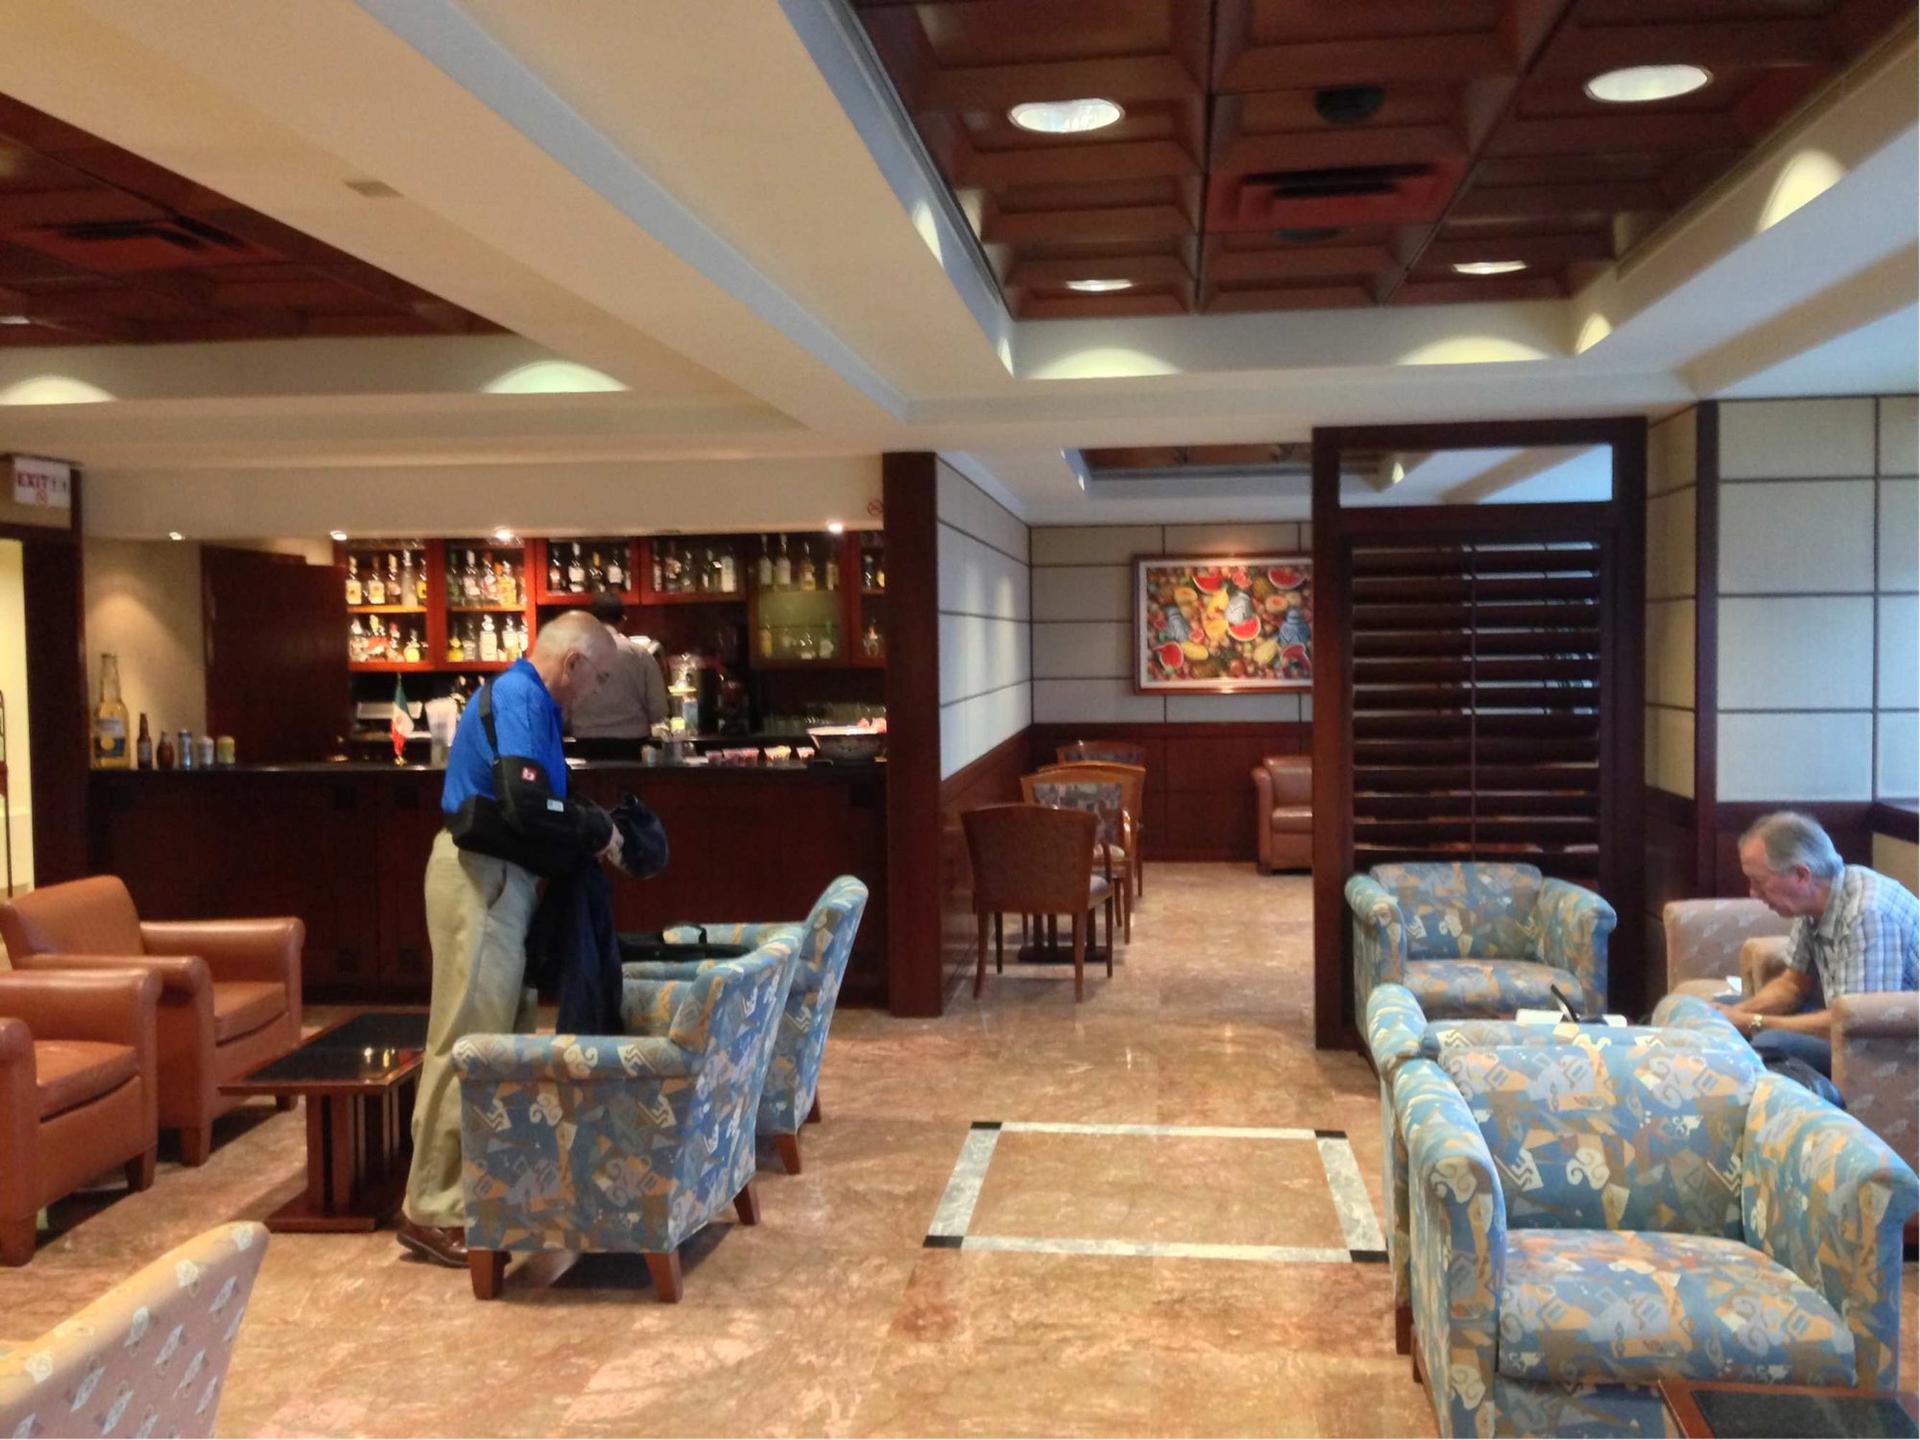 American Airlines Admirals Club image 13 of 32